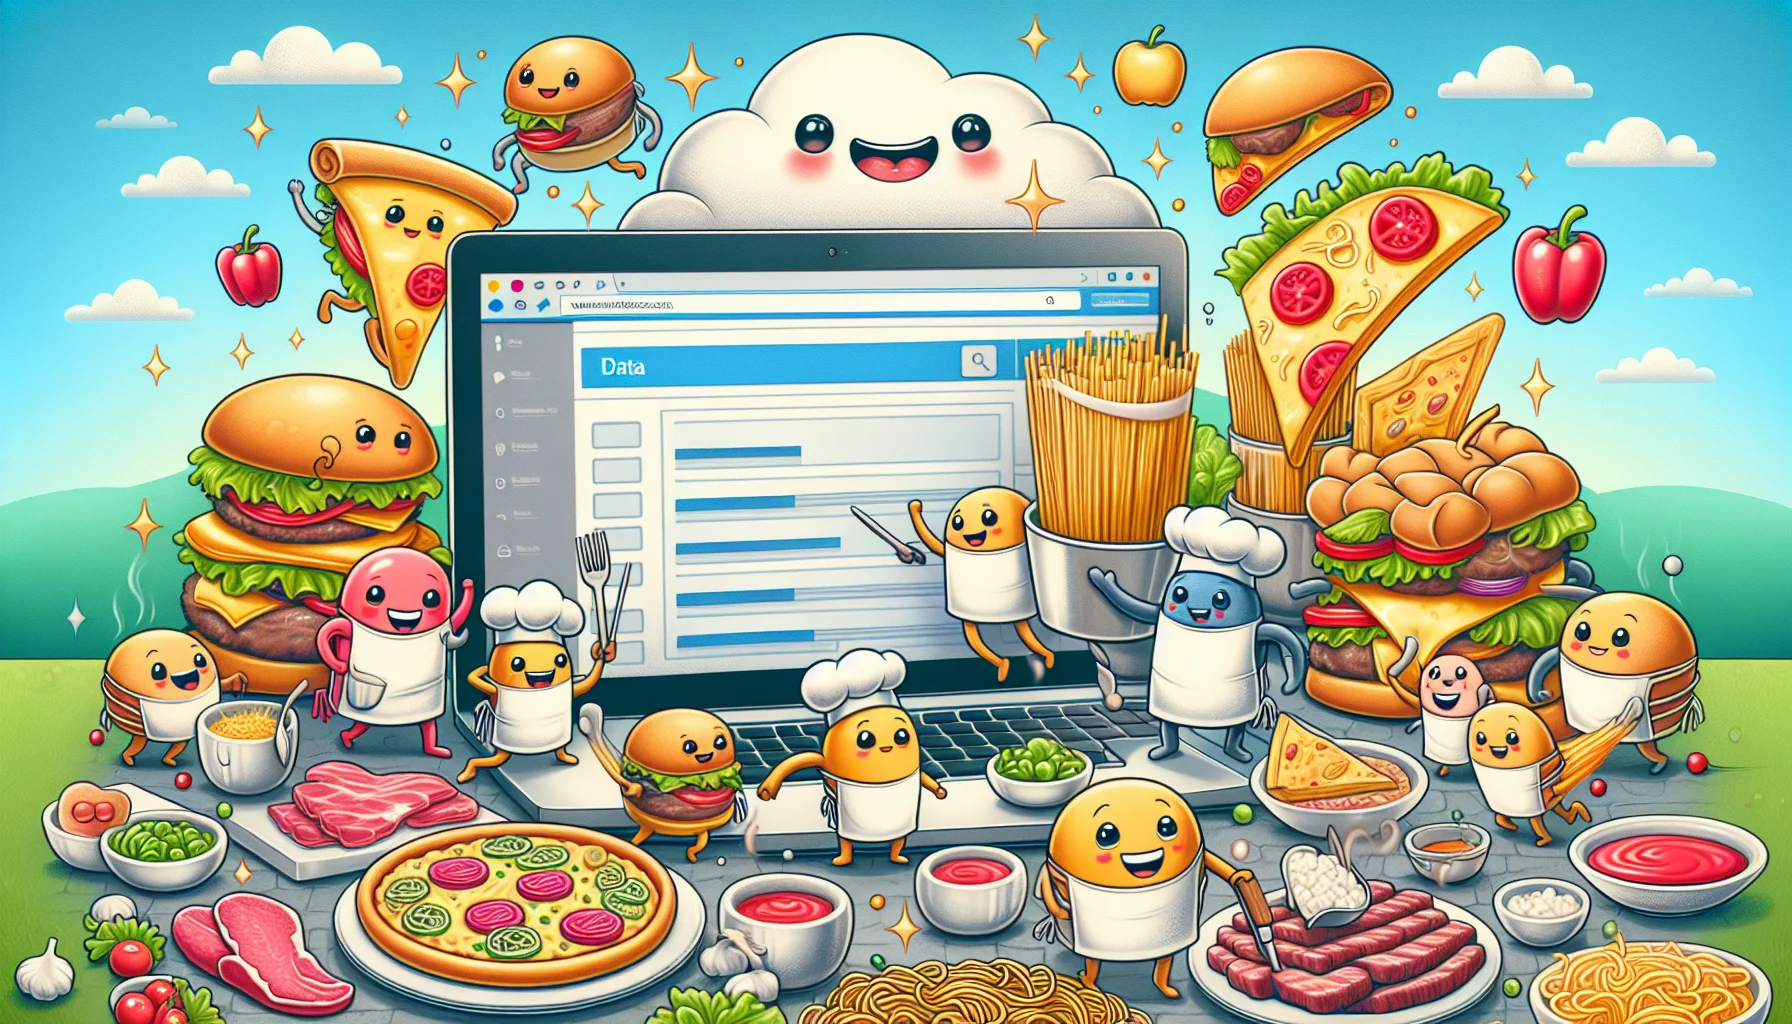 Create a fun and lighthearted scene that represents the best website builder for restaurants. In this image, depict assorted food items (like pizzas, burgers, noodles, and steaks) cheerfully working in unison to build a webpage structure. The food items can be anthropomorphized, meaning they have human features like arms, faces, and legs. To showcase web hosting, visualize data as flowing rivers or sparkling stars being carefully collected by a large, friendly-looking cloud. Add an environment that resembles a bustling kitchen to keep the restaurant theme. Ensure the overall image is enticing and stimulates humor.